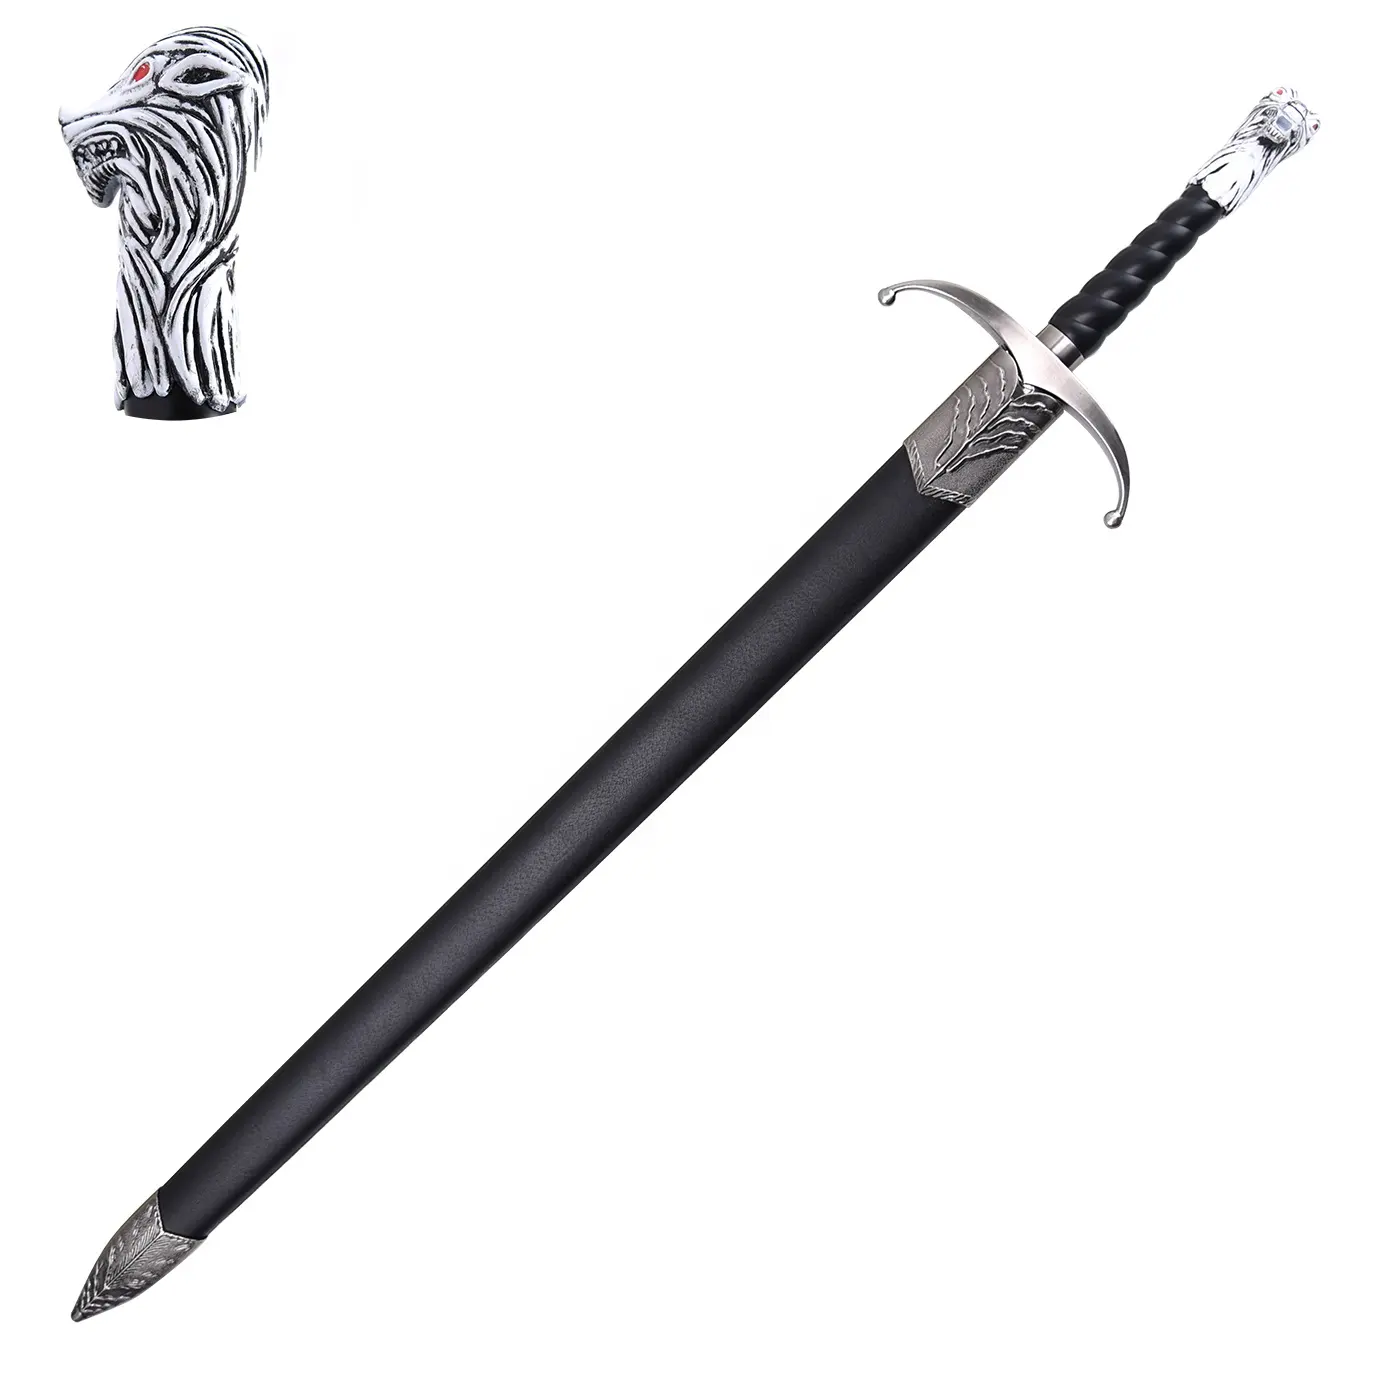 Hot Sales GOT Movie Sword Snow Western Sword Longclaw sword for Collection